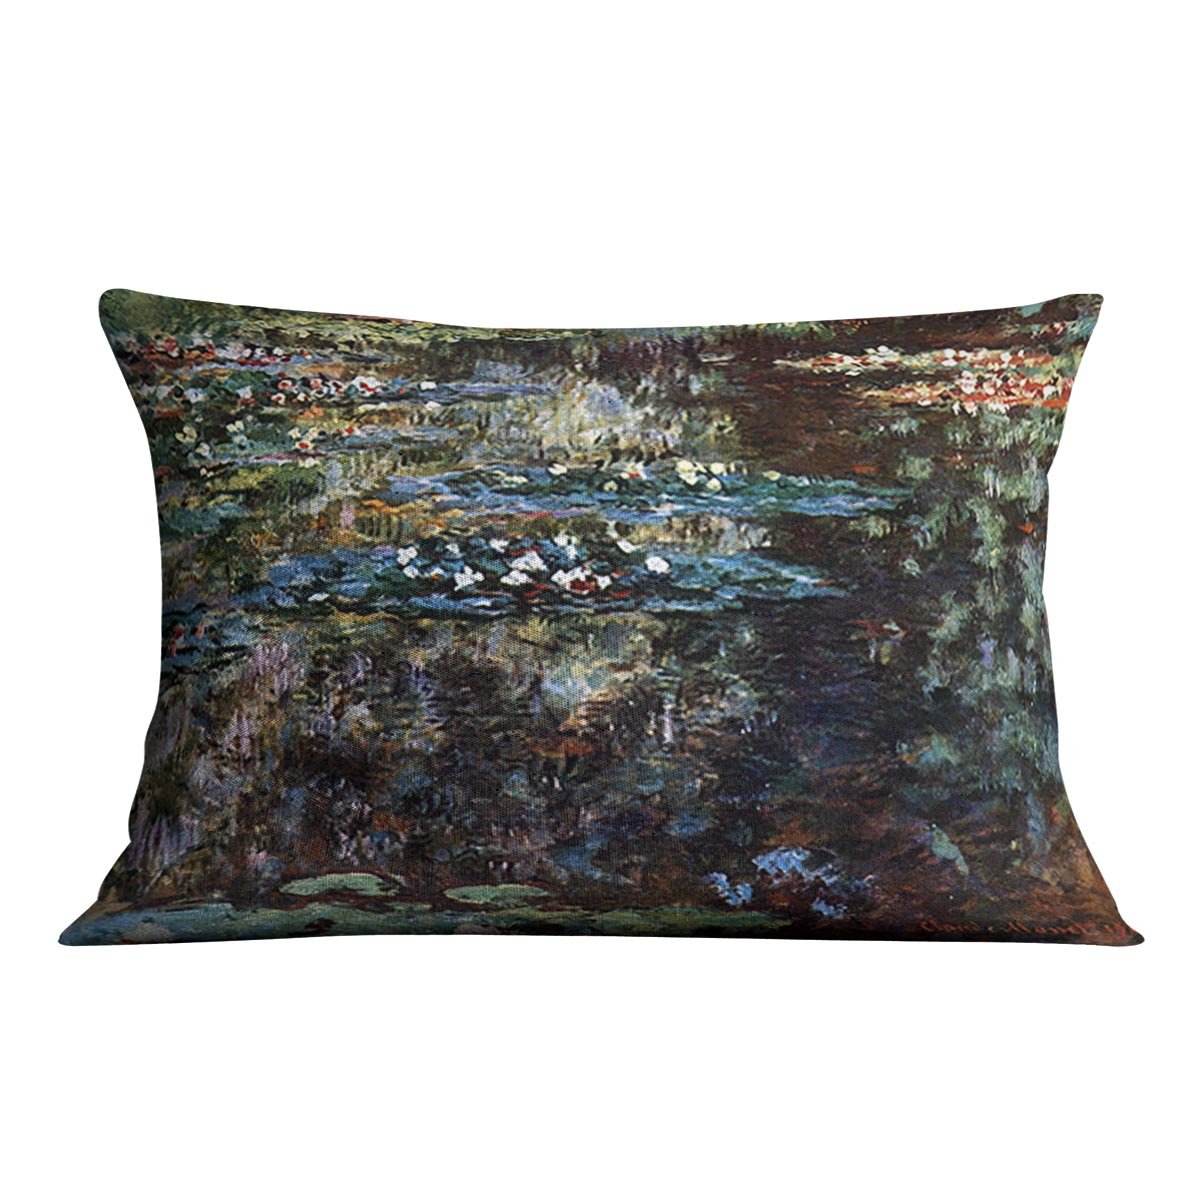 Water garden at Giverny by Monet Throw Pillow